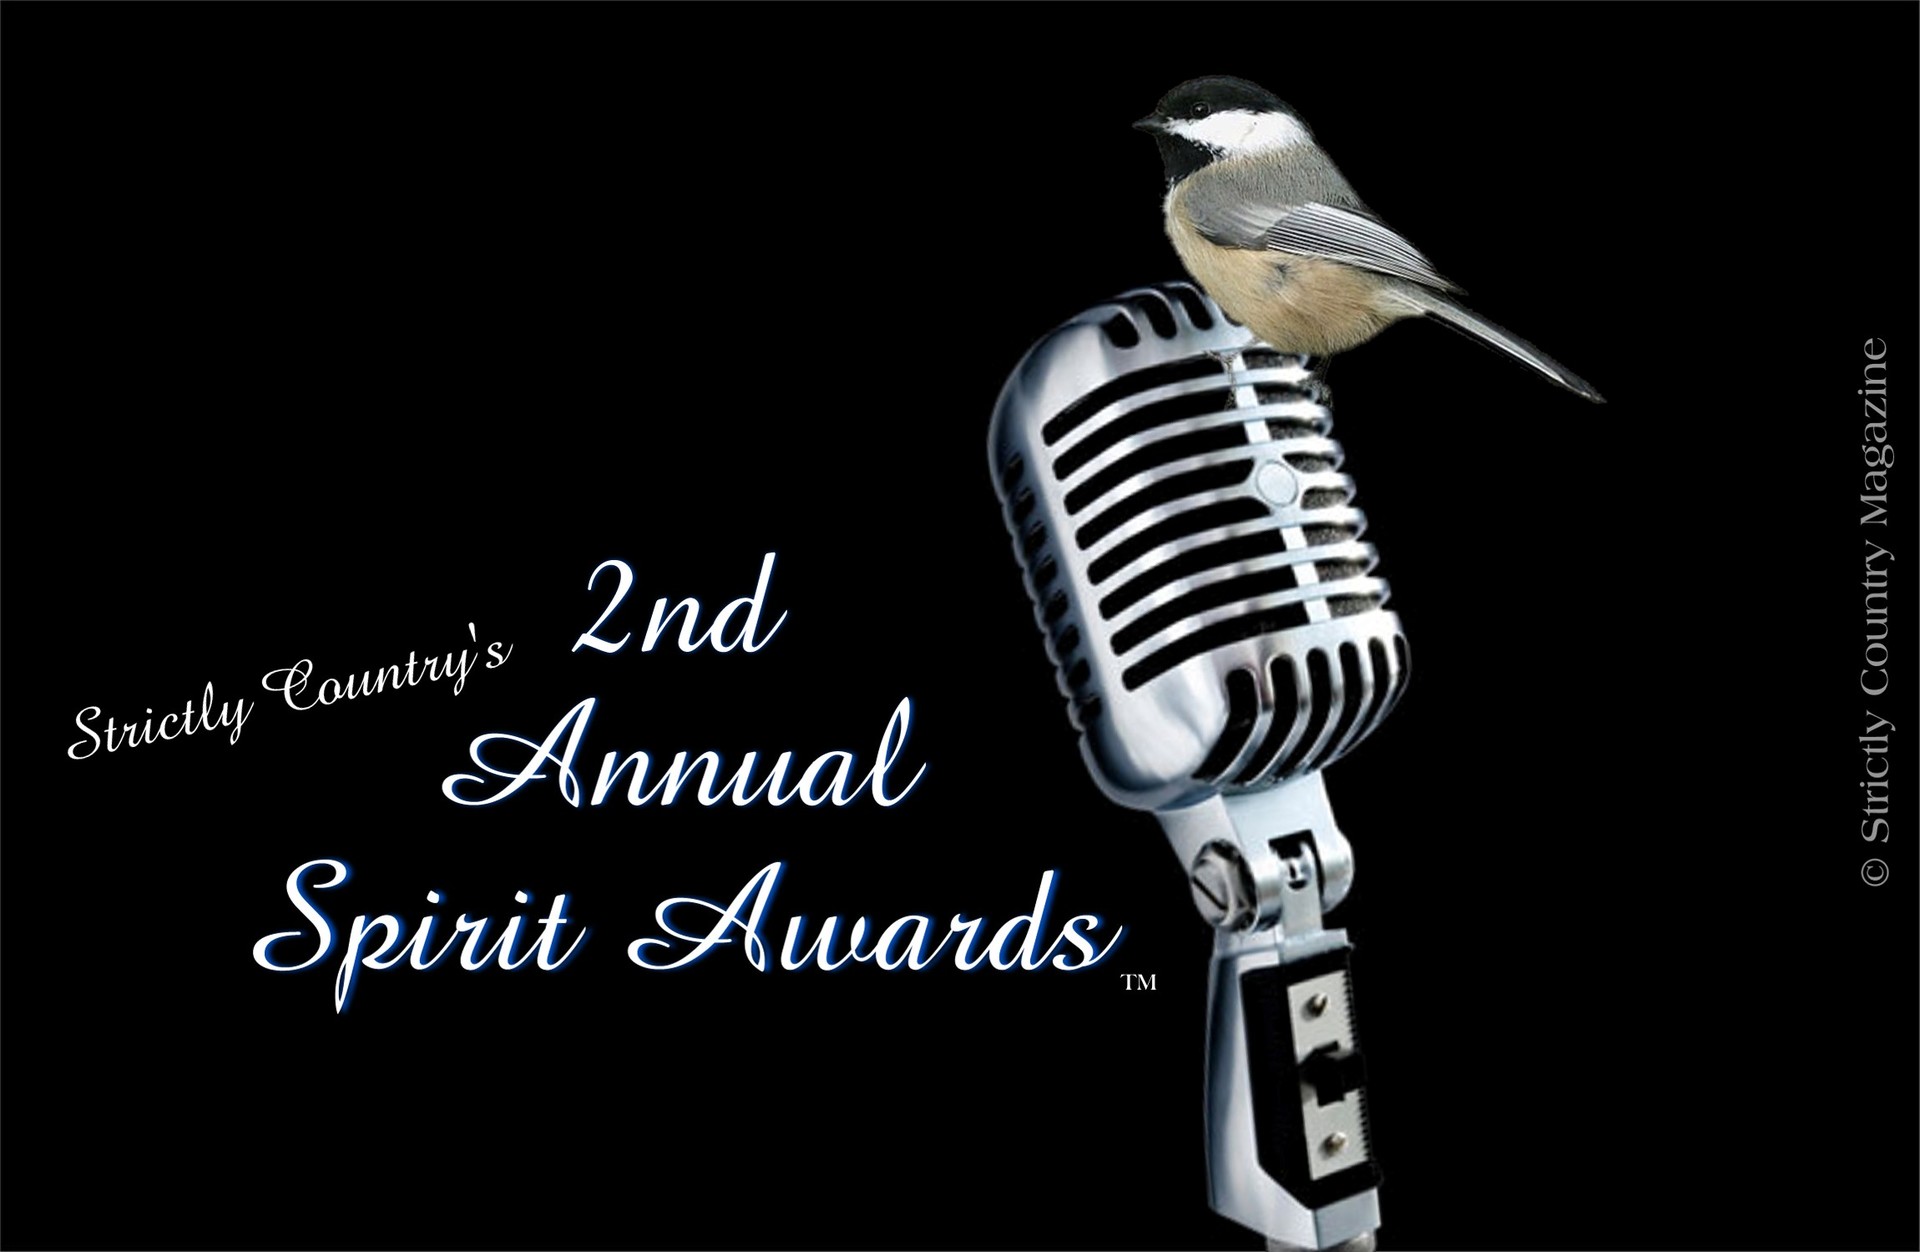 Strictly Country Magazine copyright 2nd Annual Spirit Awards official logo